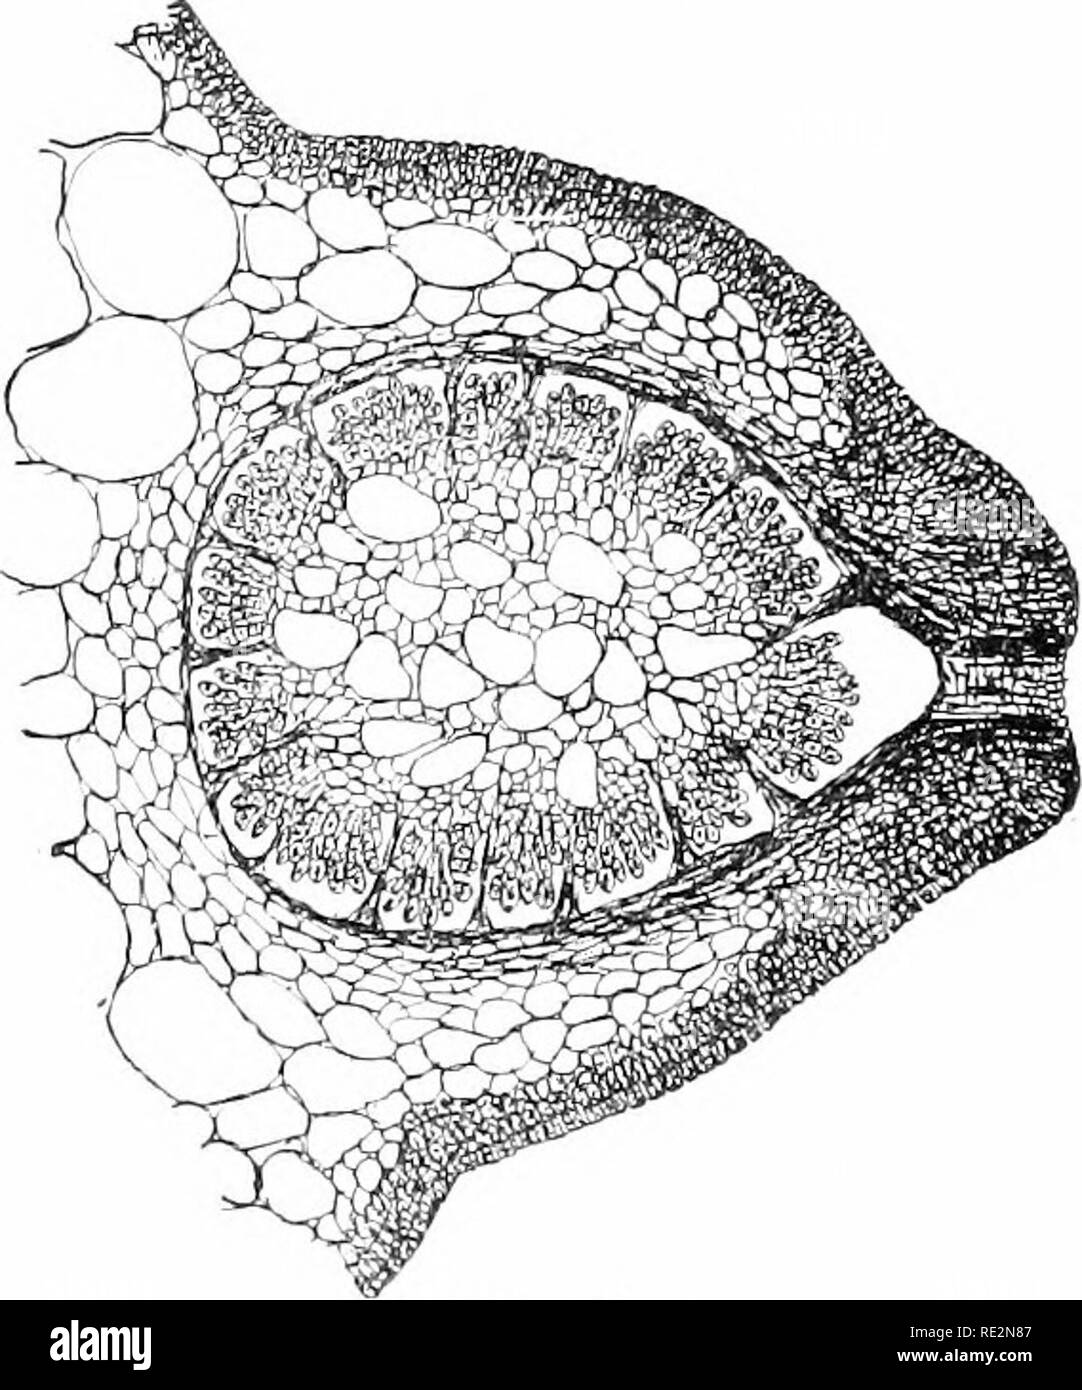 . Elementary botany. Botany. FiK. 187. Rhabdi)nia, branched prirti')!! (if friind shuw- ing cystocarps. Fig. iSS. Pectiun oi cy3ti)carp ot rliabilonia, showing spores. pcripherv of a sterile tissue witliia the cavitv. (See figs. iSy, i88.) Goni- dia in the form of tetraspores are also developed in Rhabdonia. 379. Fertilization of the higher red algae,—The pmcess of fertilization in most of the red alg;e is very complicated, chiellv becausi.' the fertilizrd egg ceil (pTocarp) dues nut devulop the spores directly, as in Xemalion, Le-. Please note that these images are extracted from scanned page Stock Photo